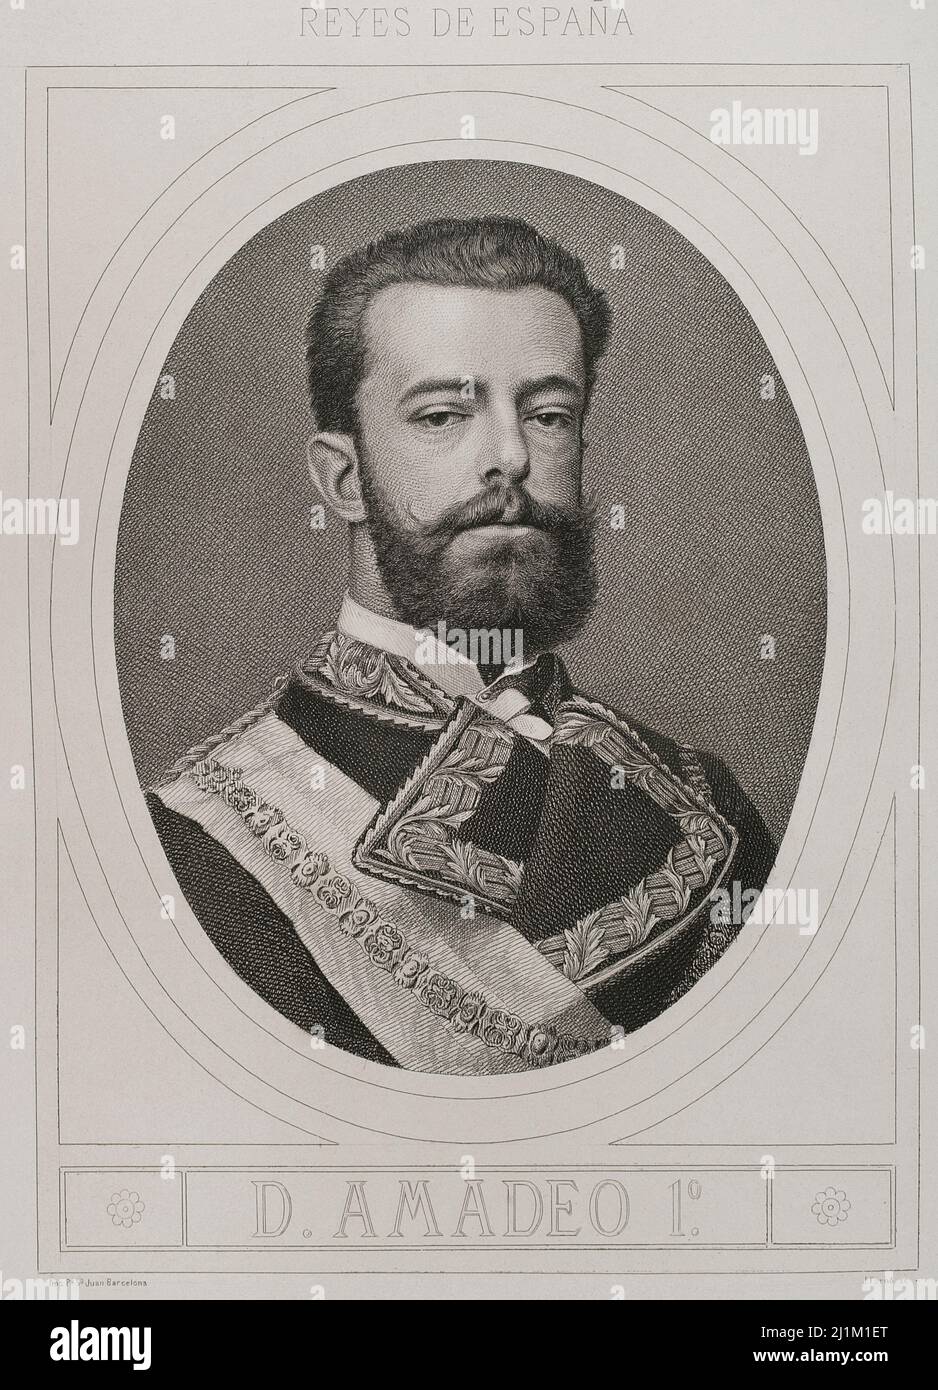 Amadeo I of Spain (1845-1890). King of Spain from January 2, 1871 to February 11, 1873. First Duke of Aosta. Portrait. Engraving by J. Furnó. Historia General de España by Modesto Lafuente. Volume IV. Published in Barcelona, 1882. Stock Photo